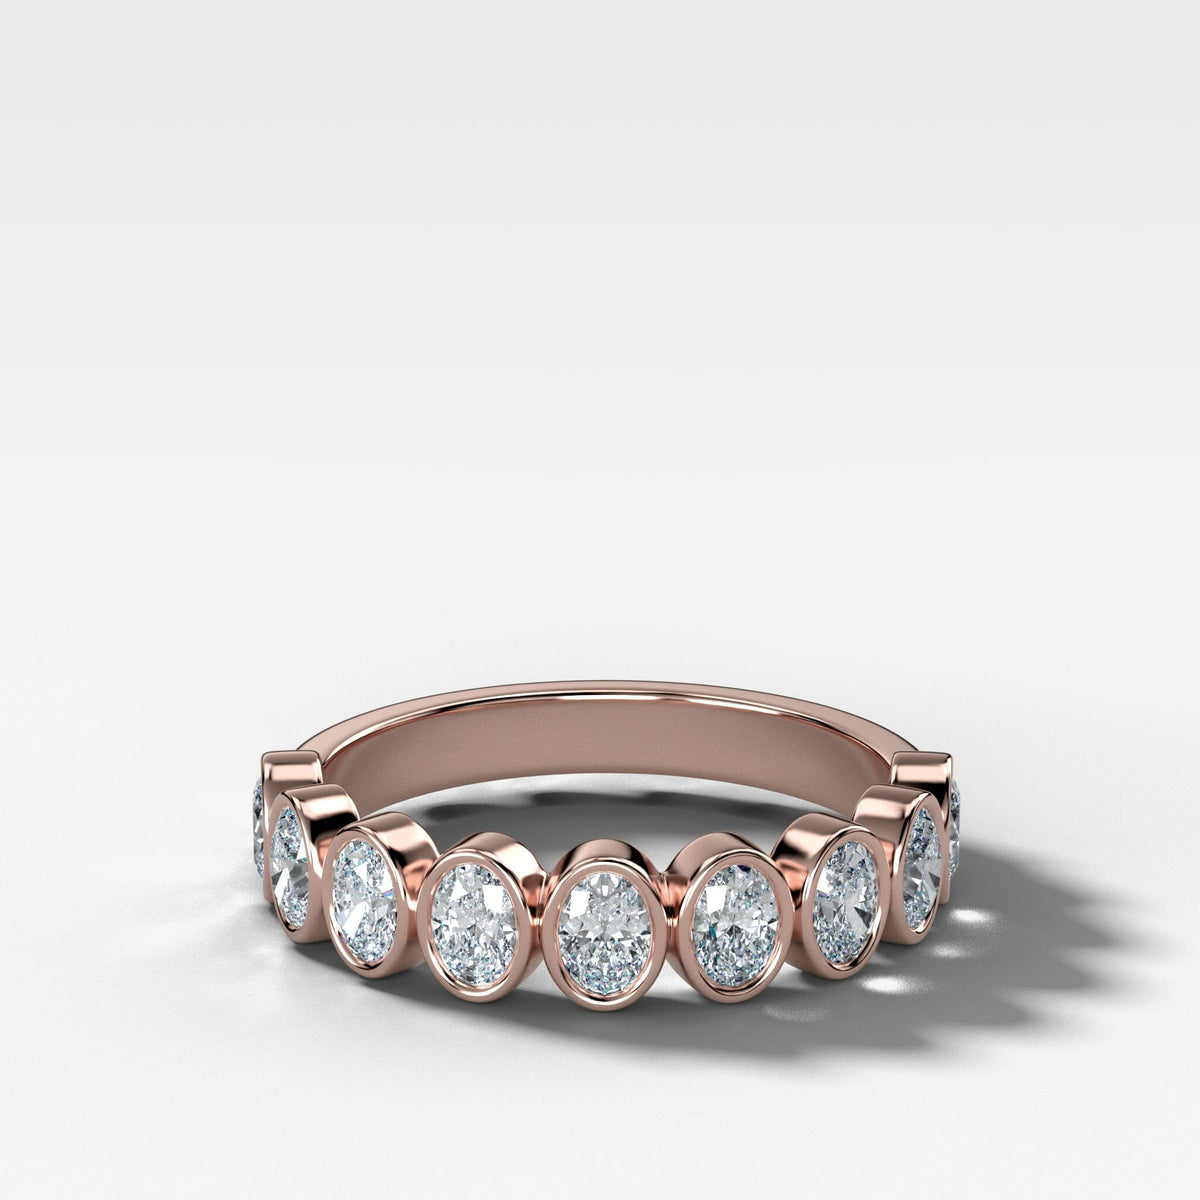 Baby Bezel Set Halfway Wedding Band With Oval Cuts Band Good Stone Inc Rose Gold 14k Natural